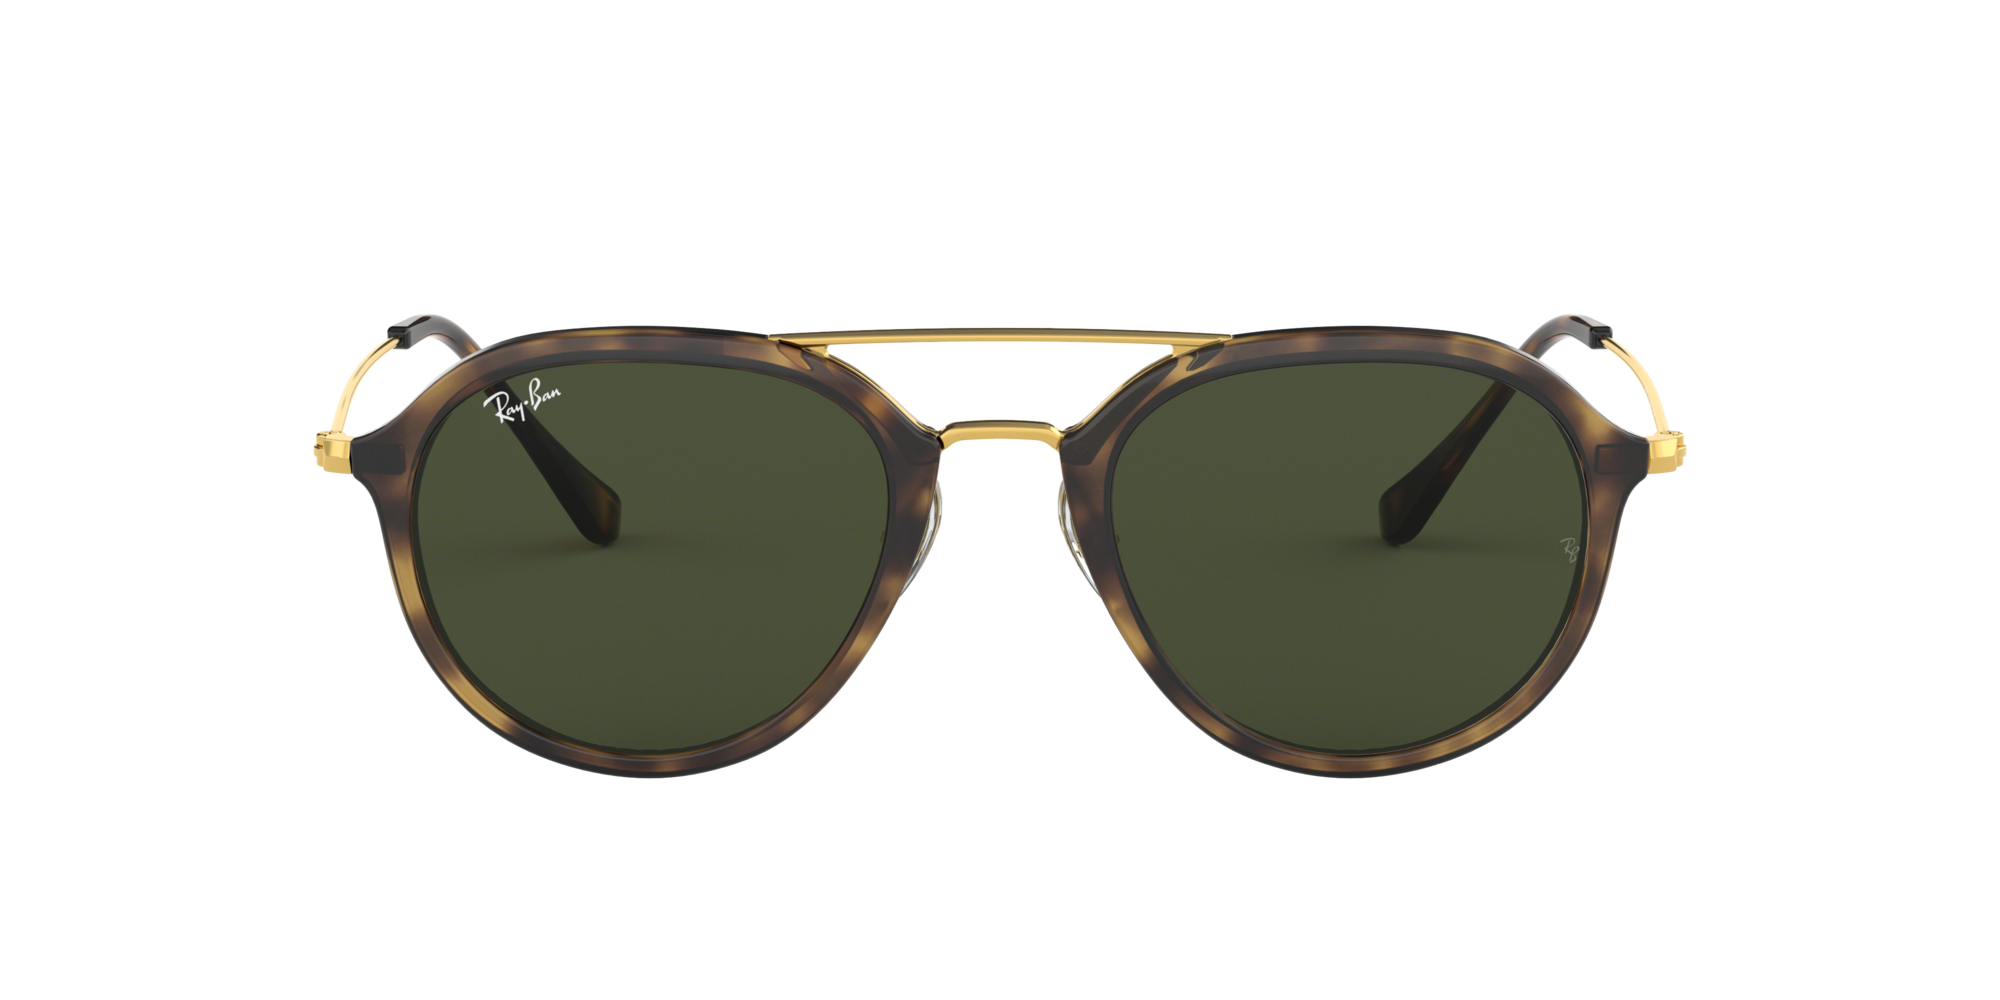 Ray-Ban 0RB4253 in Tortoise Sunglasses 